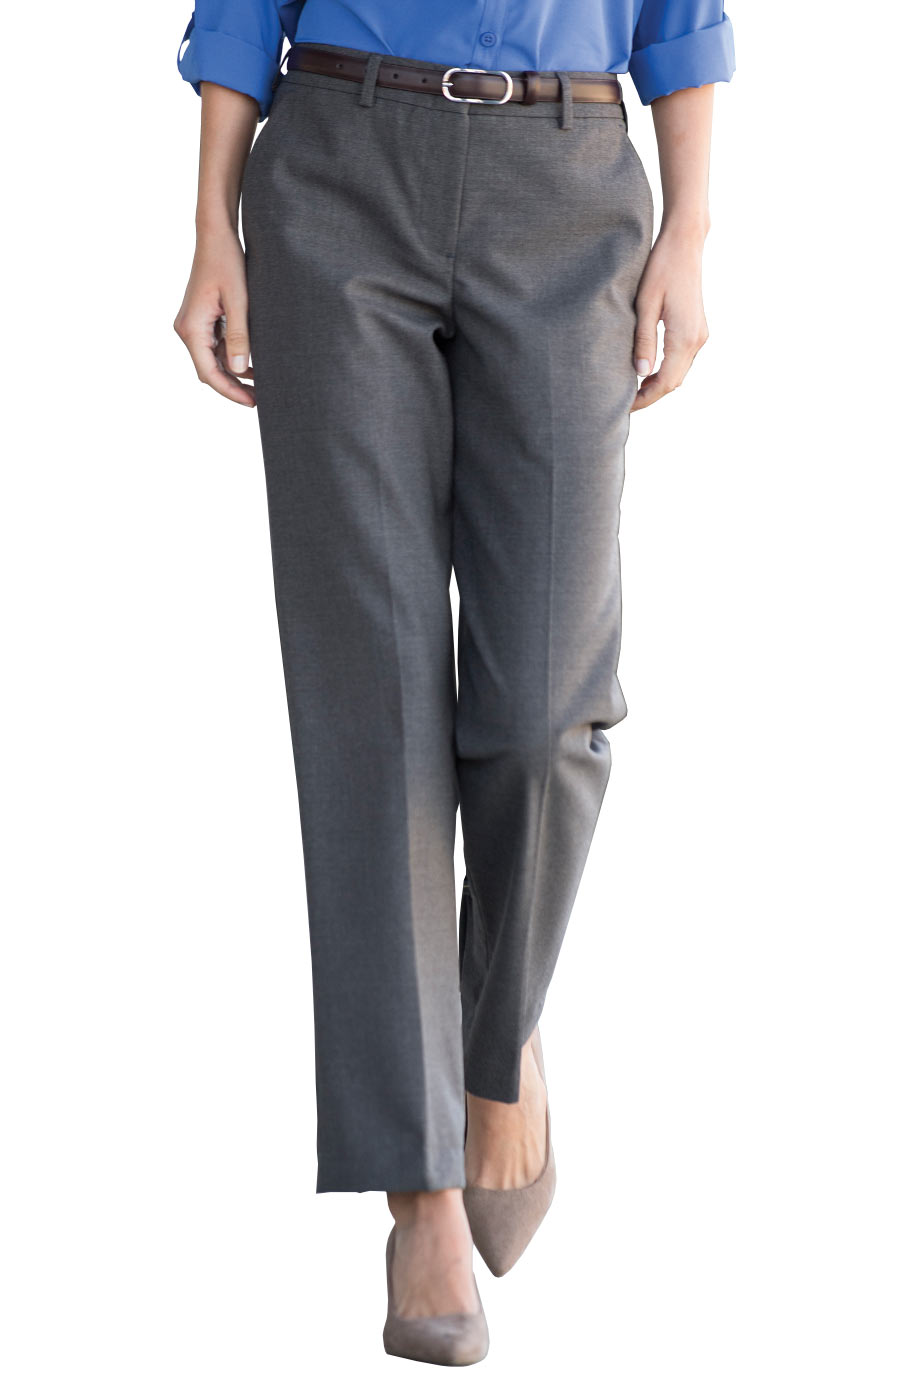 WASHABLE WOOL FLAT FRONT PANT